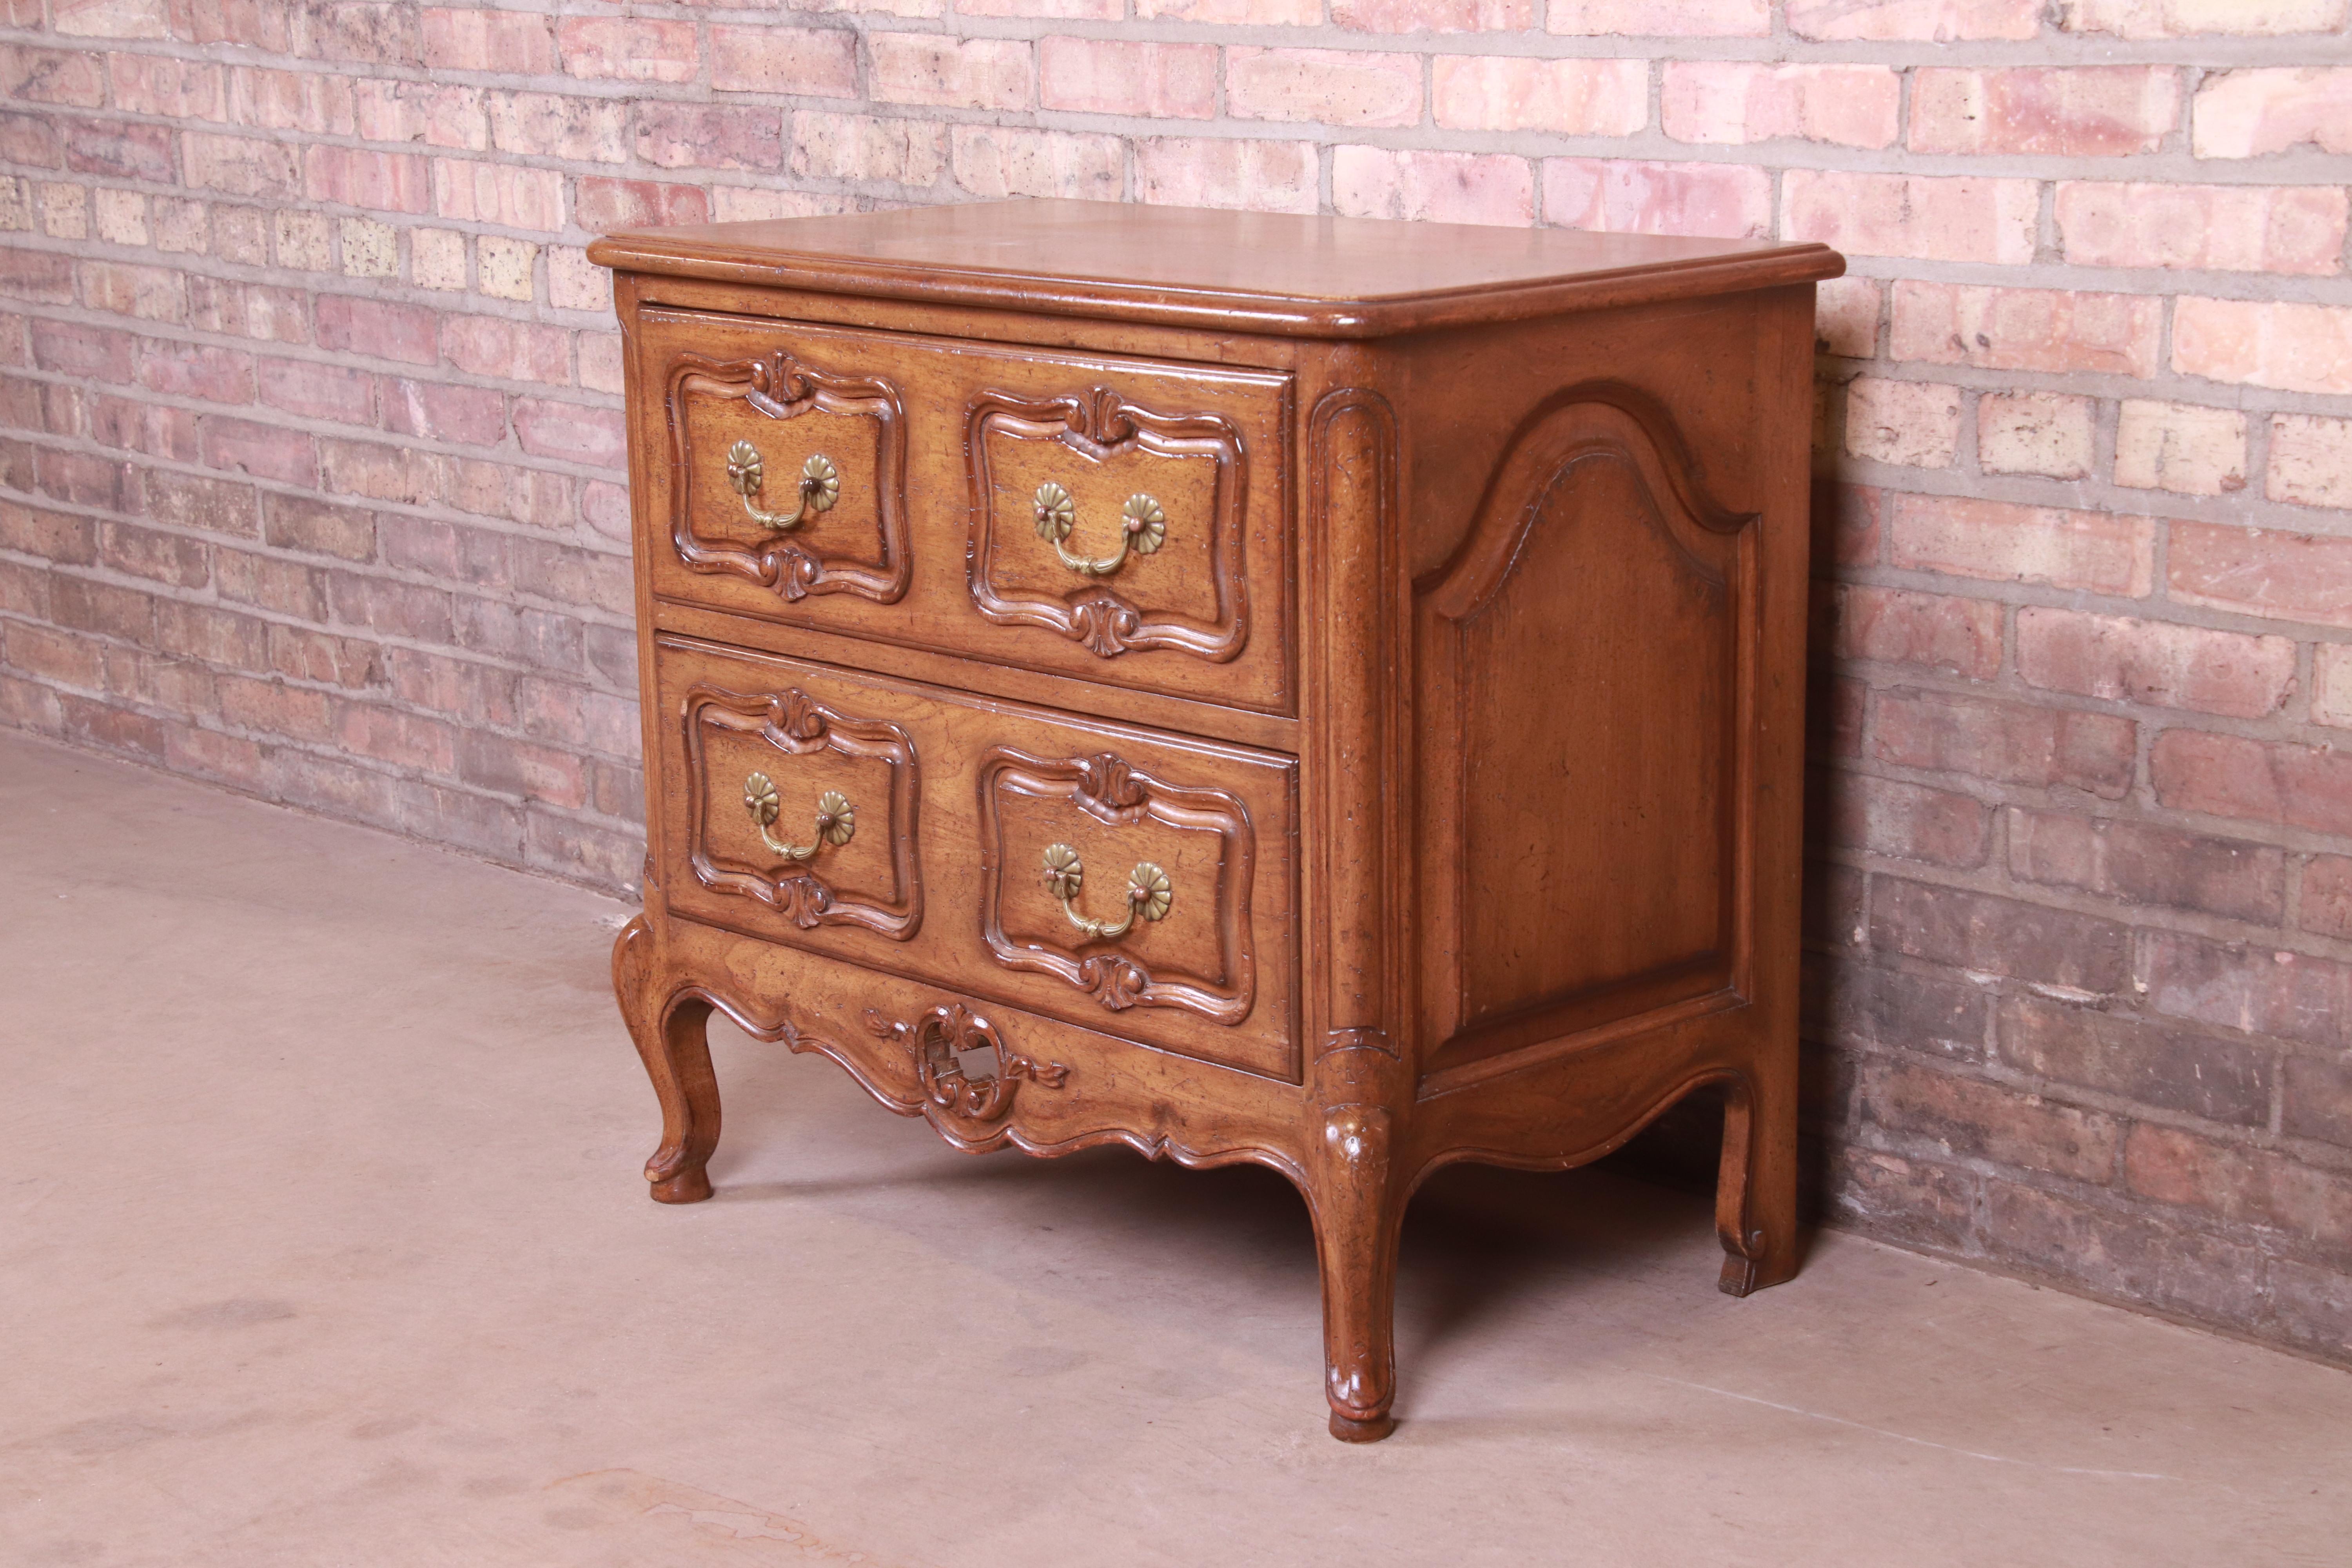 Auffray & Co. French Provincial Louis XV Carved Walnut Chest of Drawers In Good Condition For Sale In South Bend, IN